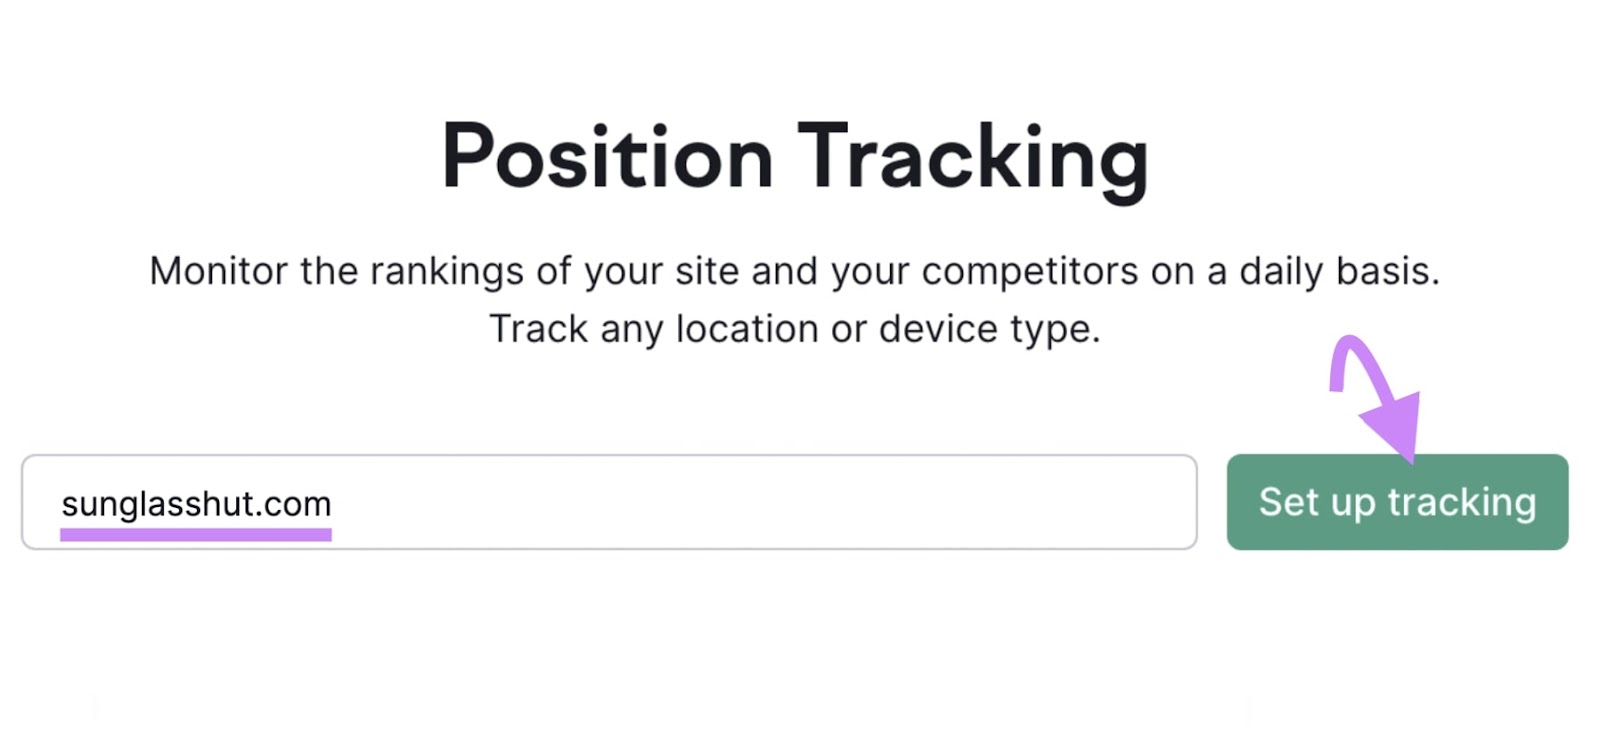 "sunglasshut.com" entered into the Position Tracking tool search bar